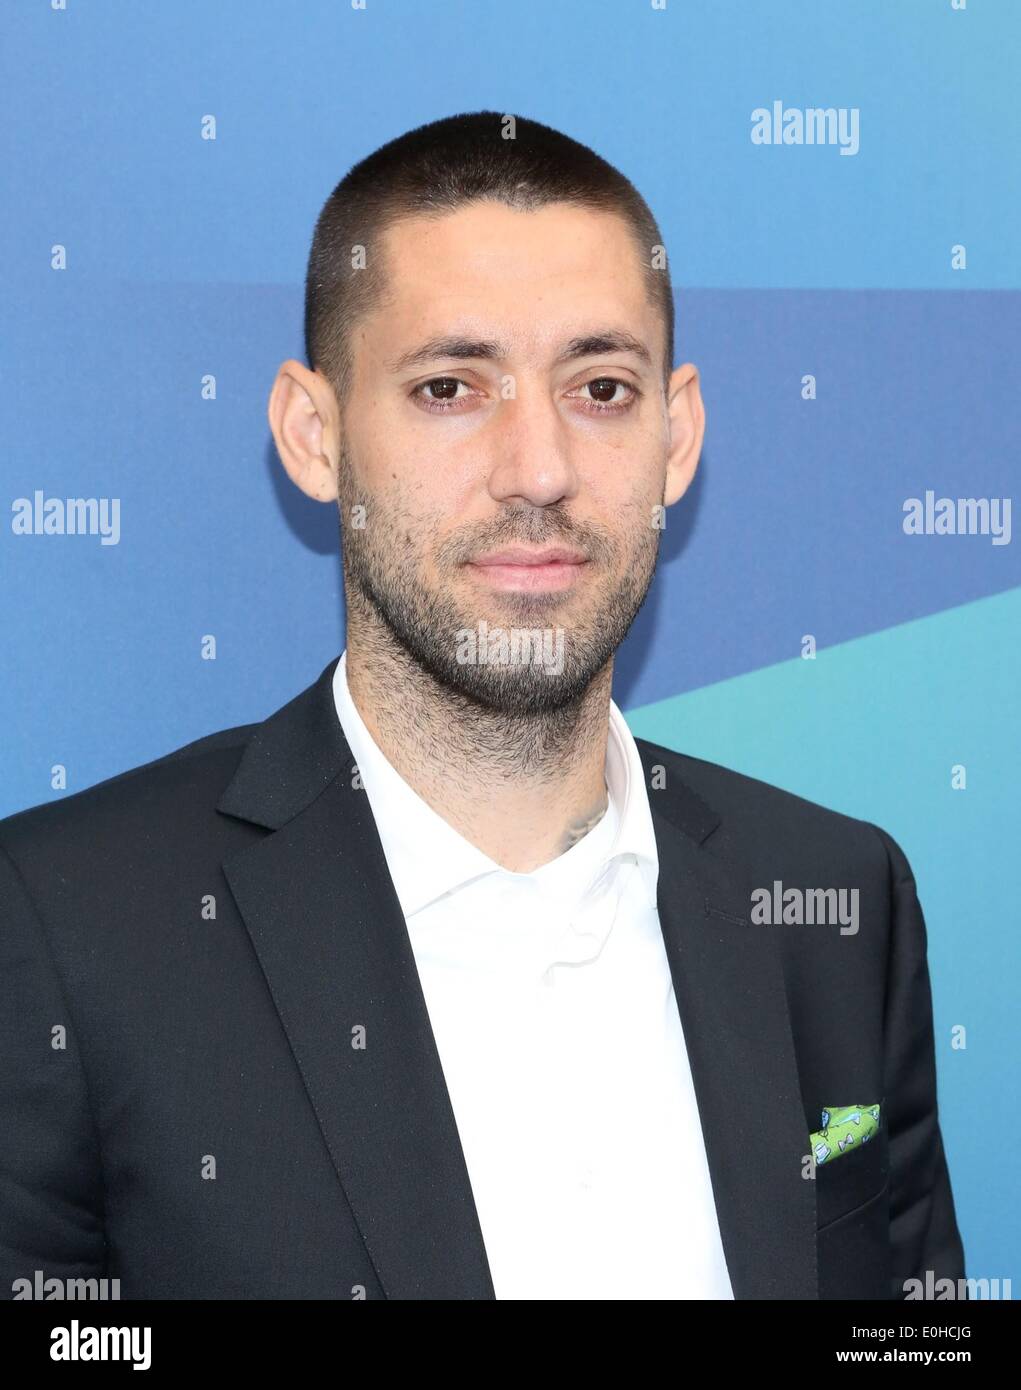 New York, NY, USA. 13th May, 2014. Clint Dempsey at arrivals for 2014 Univision Upfront, Gotham Hall, New York, NY May 13, 2014. Credit:  Andres Otero/Everett Collection/Alamy Live News Stock Photo